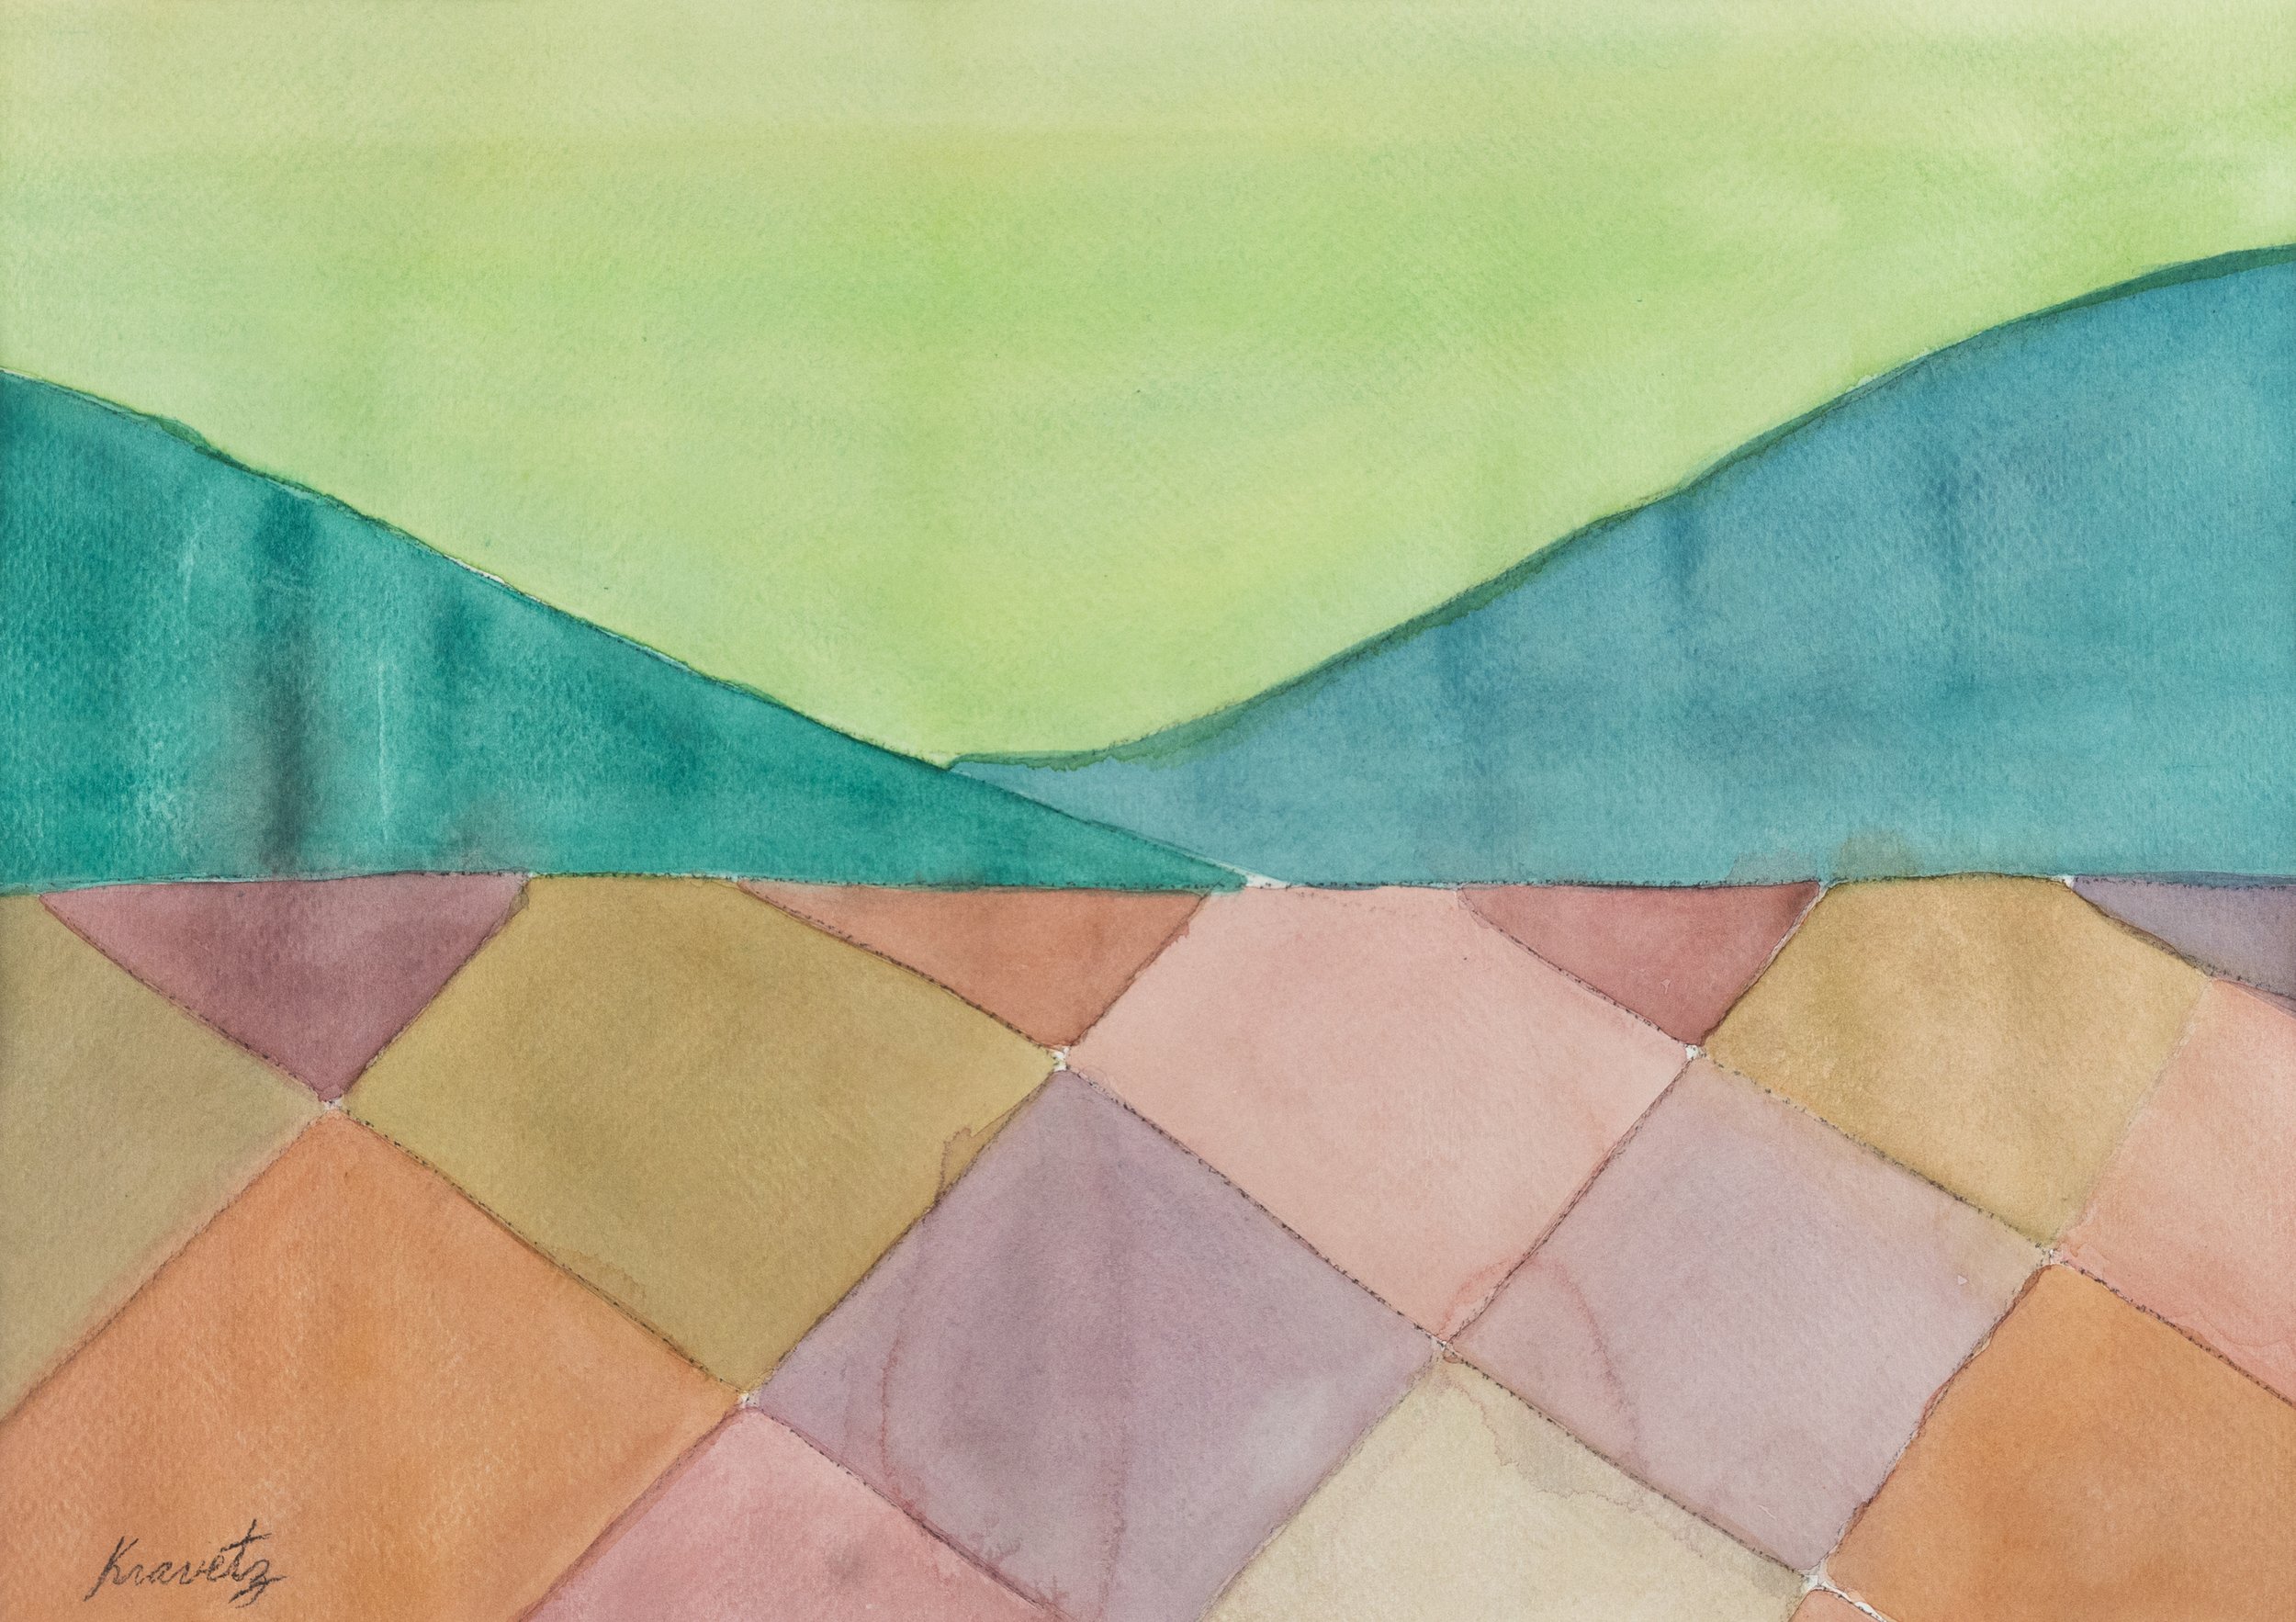 Farmland II, 1991, watercolor, 20x26 inches with mat